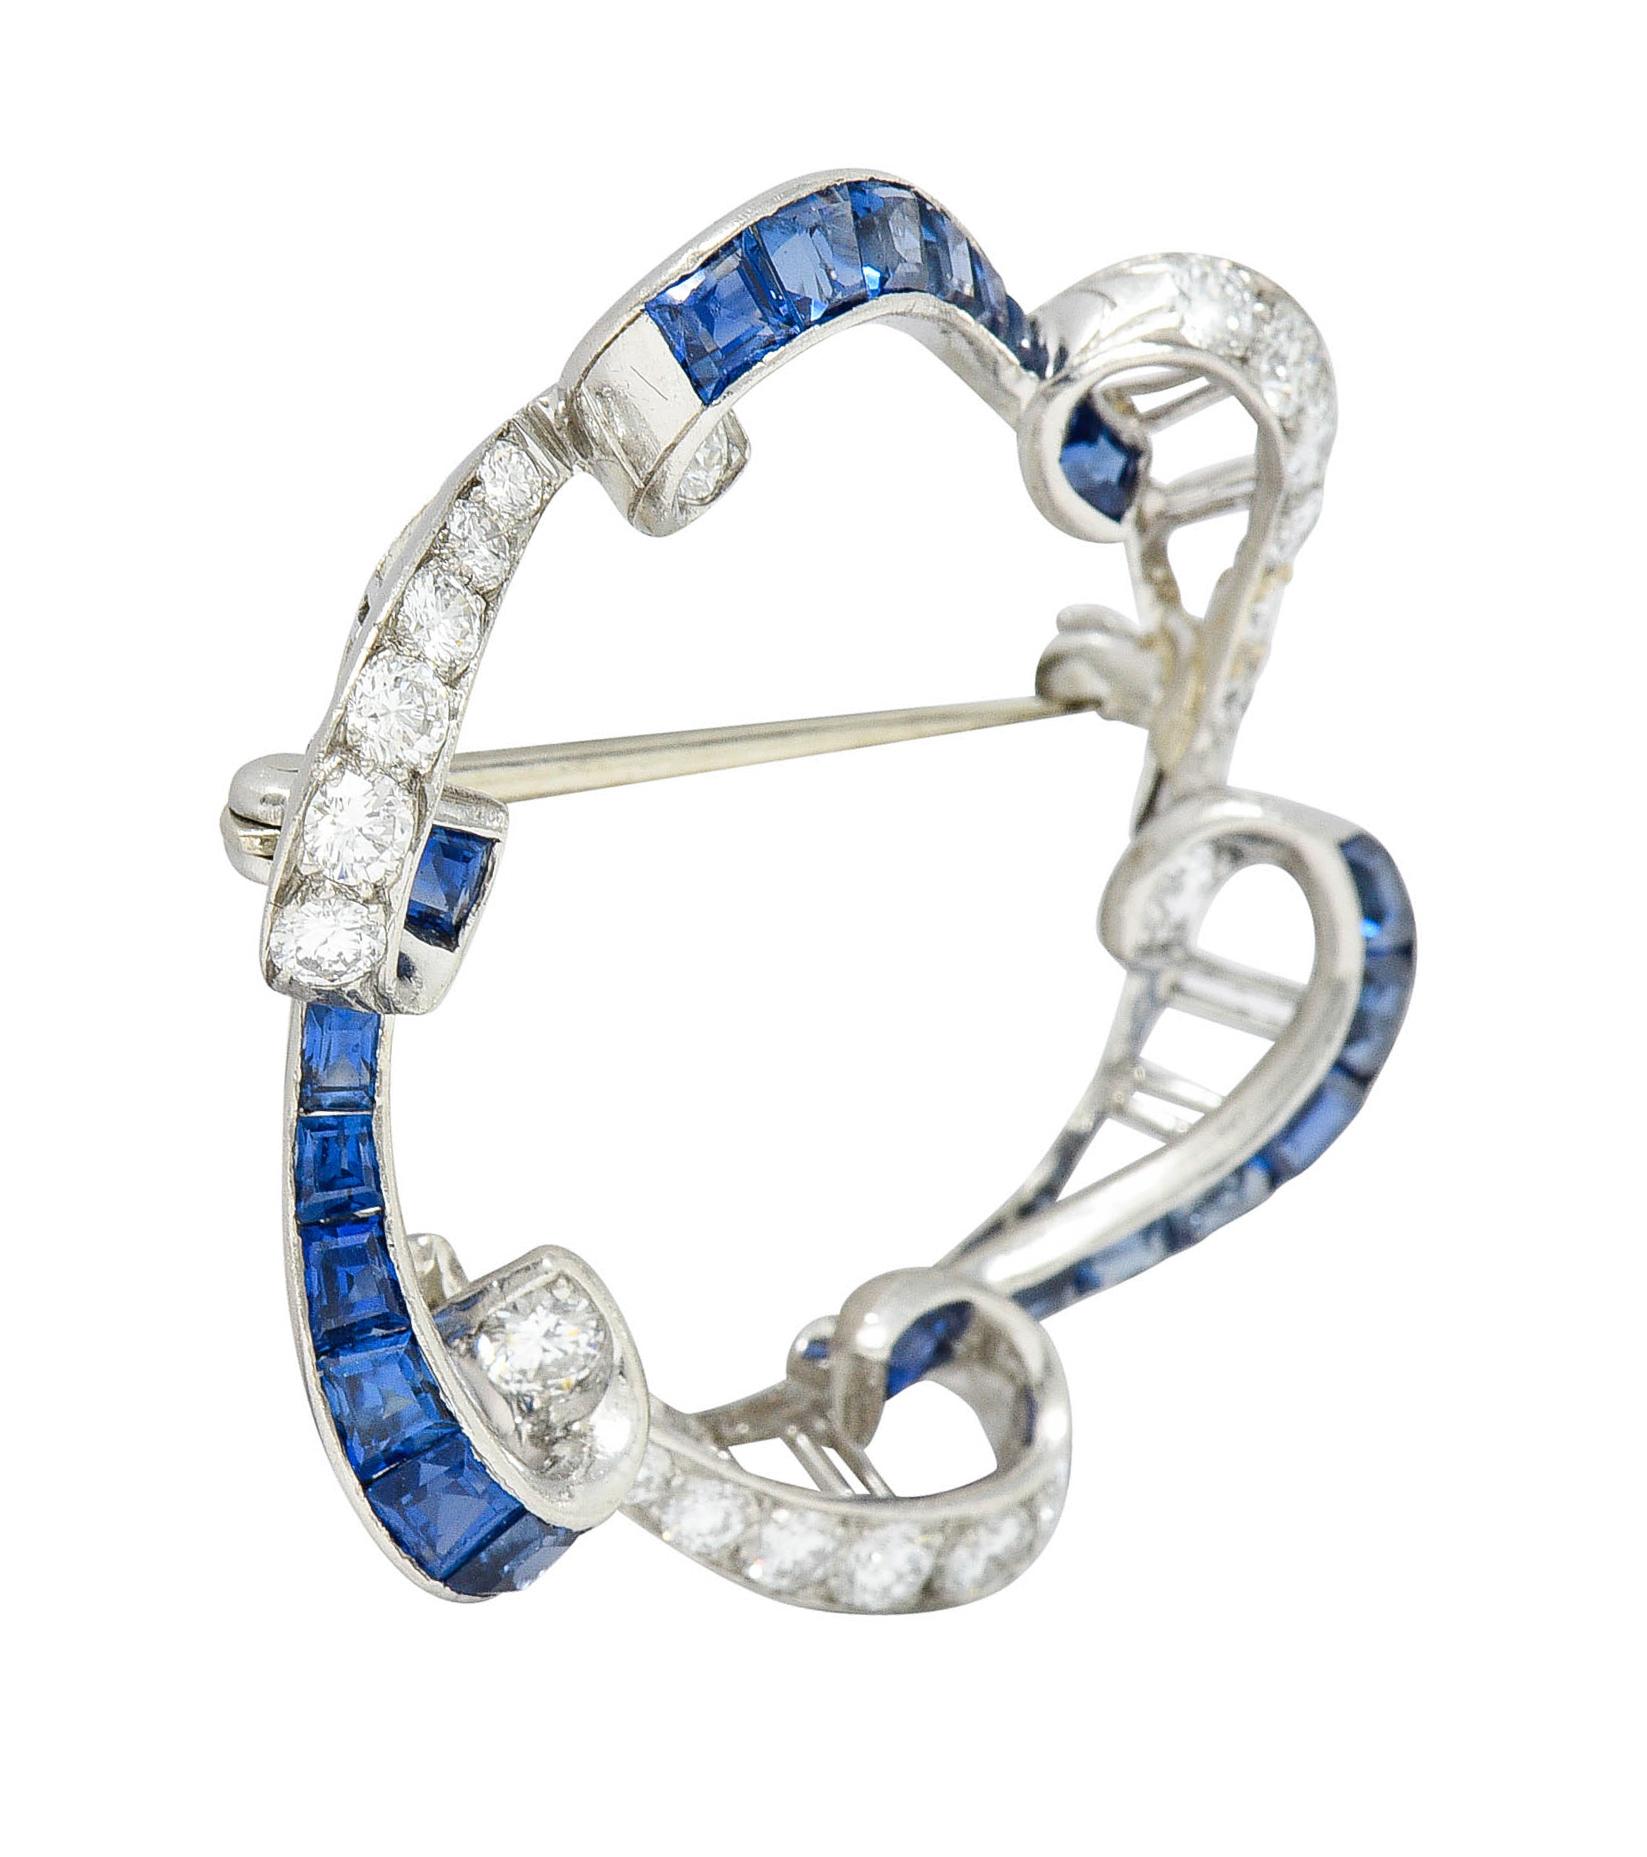 Wreath style brooch is comprised of ribbon-like scrolls - alternating sections of sapphires and diamonds

Sapphires are a very well matched royal blue while weighing approximately 2.70 carats

Round brilliant cut diamonds weigh in total